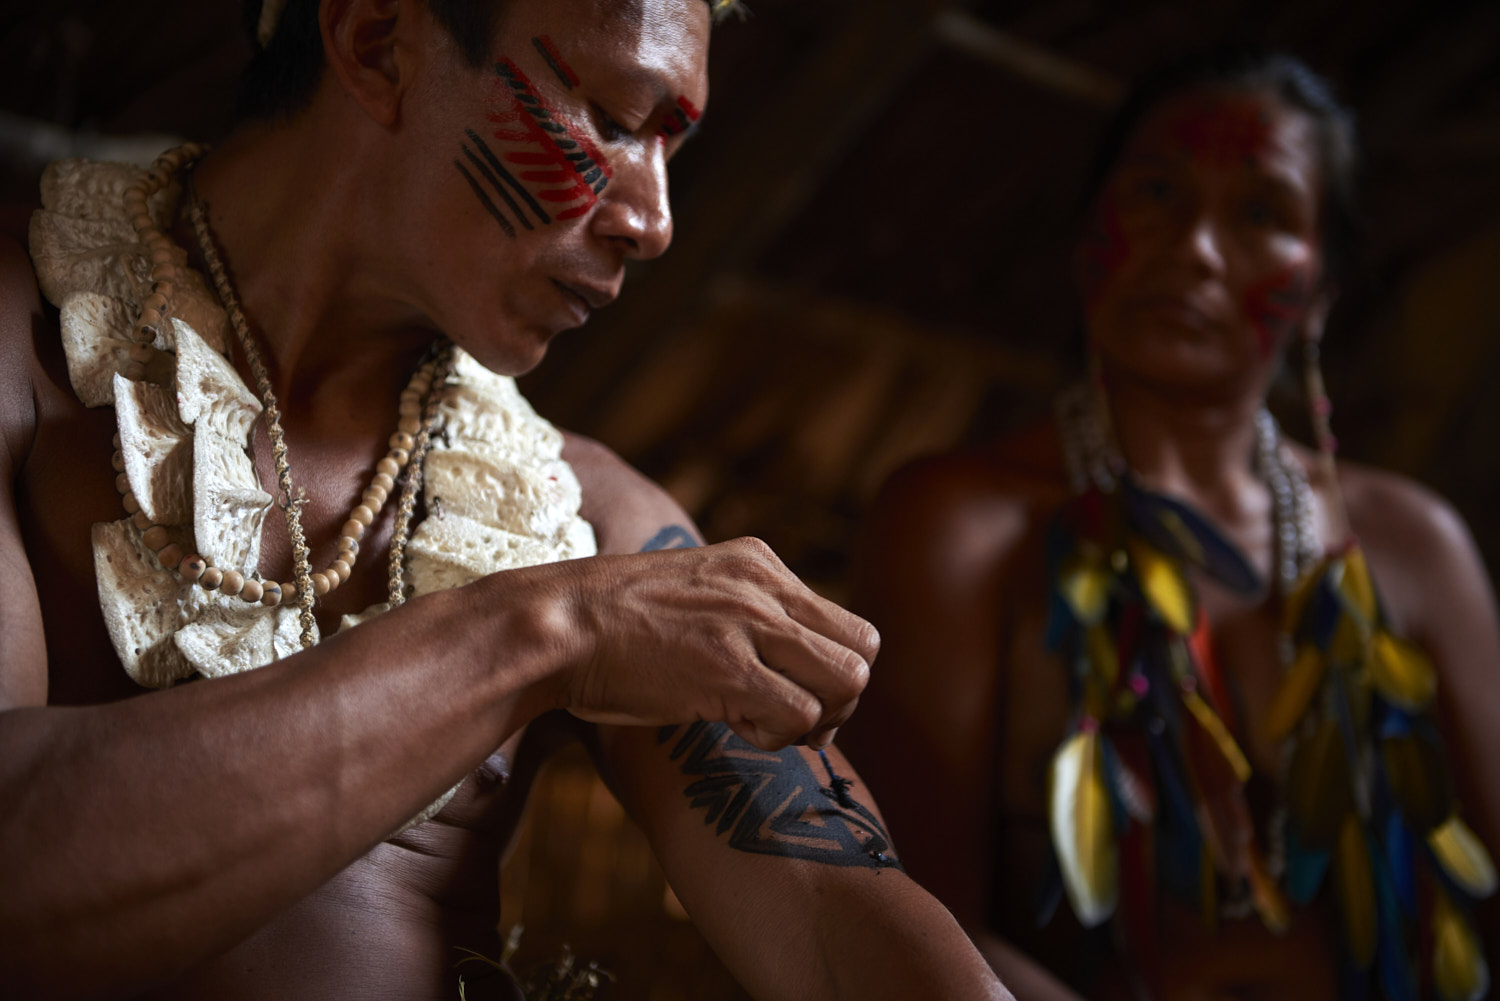 Amazon, Brazil: An indigenous man applies body paint to his arm in preparation to a traditional dance performance, observed by his partner.